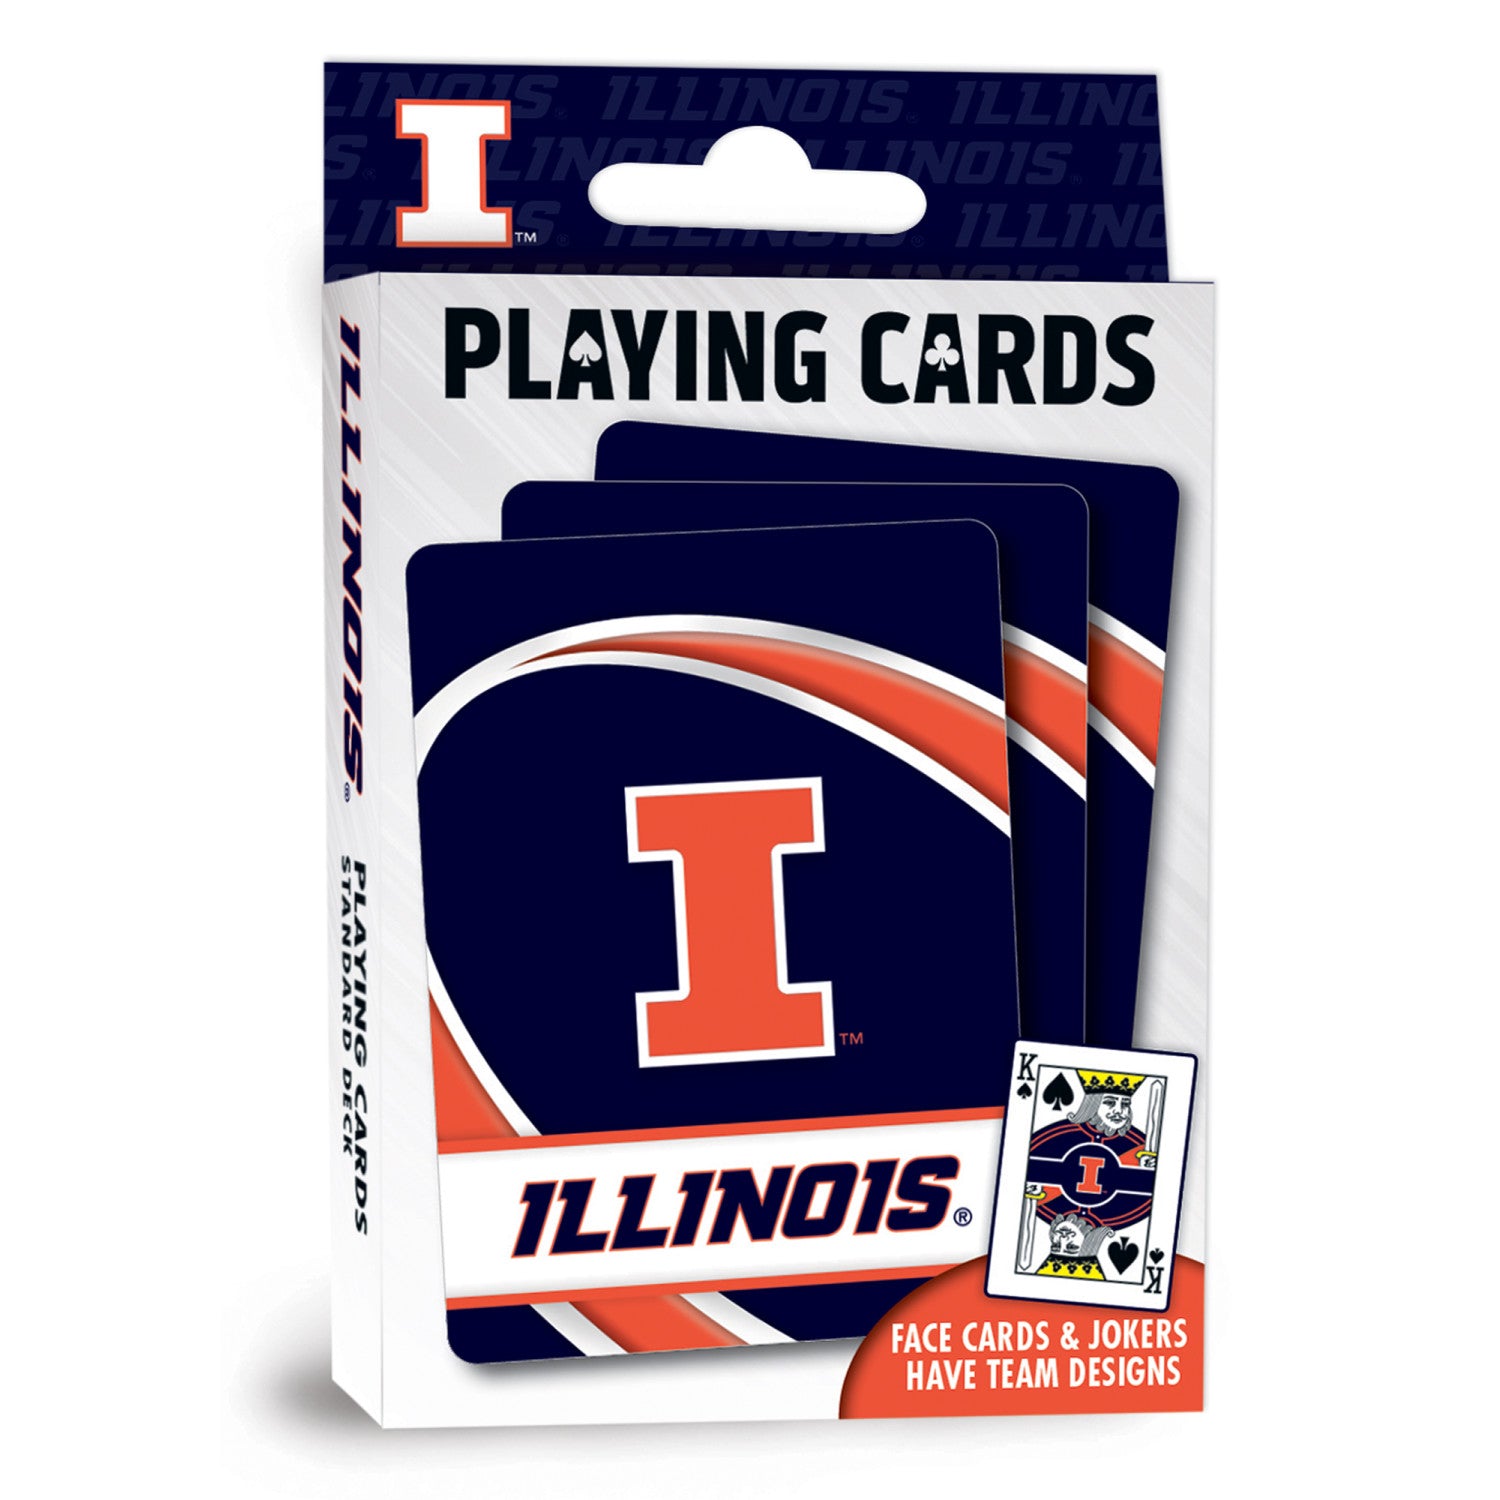 Illinois Fighting Illini Playing Cards - 54 Card Deck